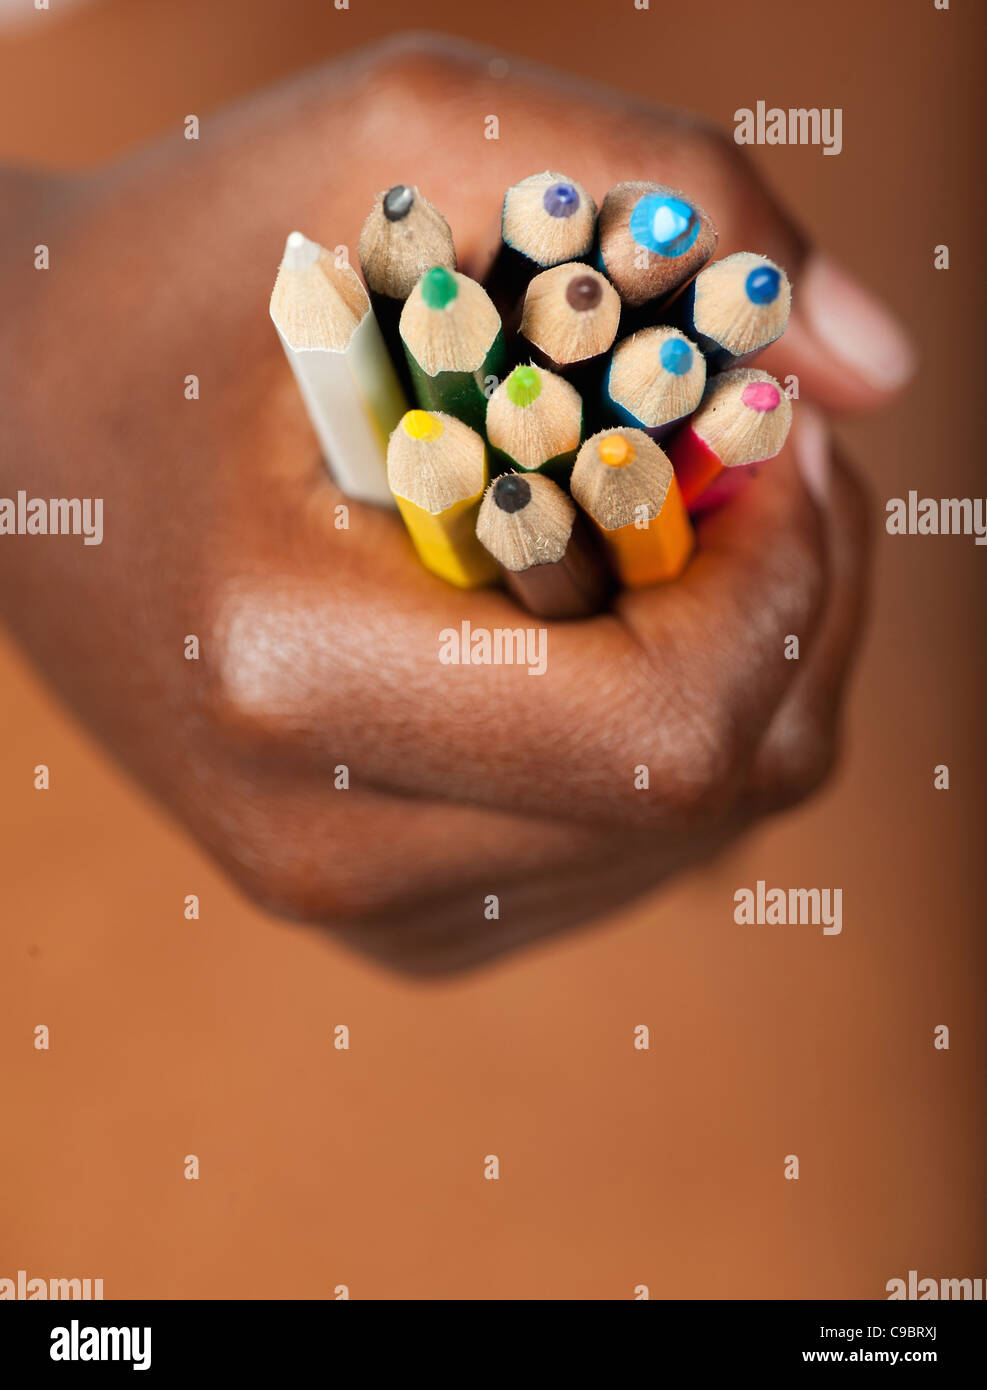 Childs hand gripping colored pencils, Johannesburg, Gauteng Province, South Africa Stock Photo